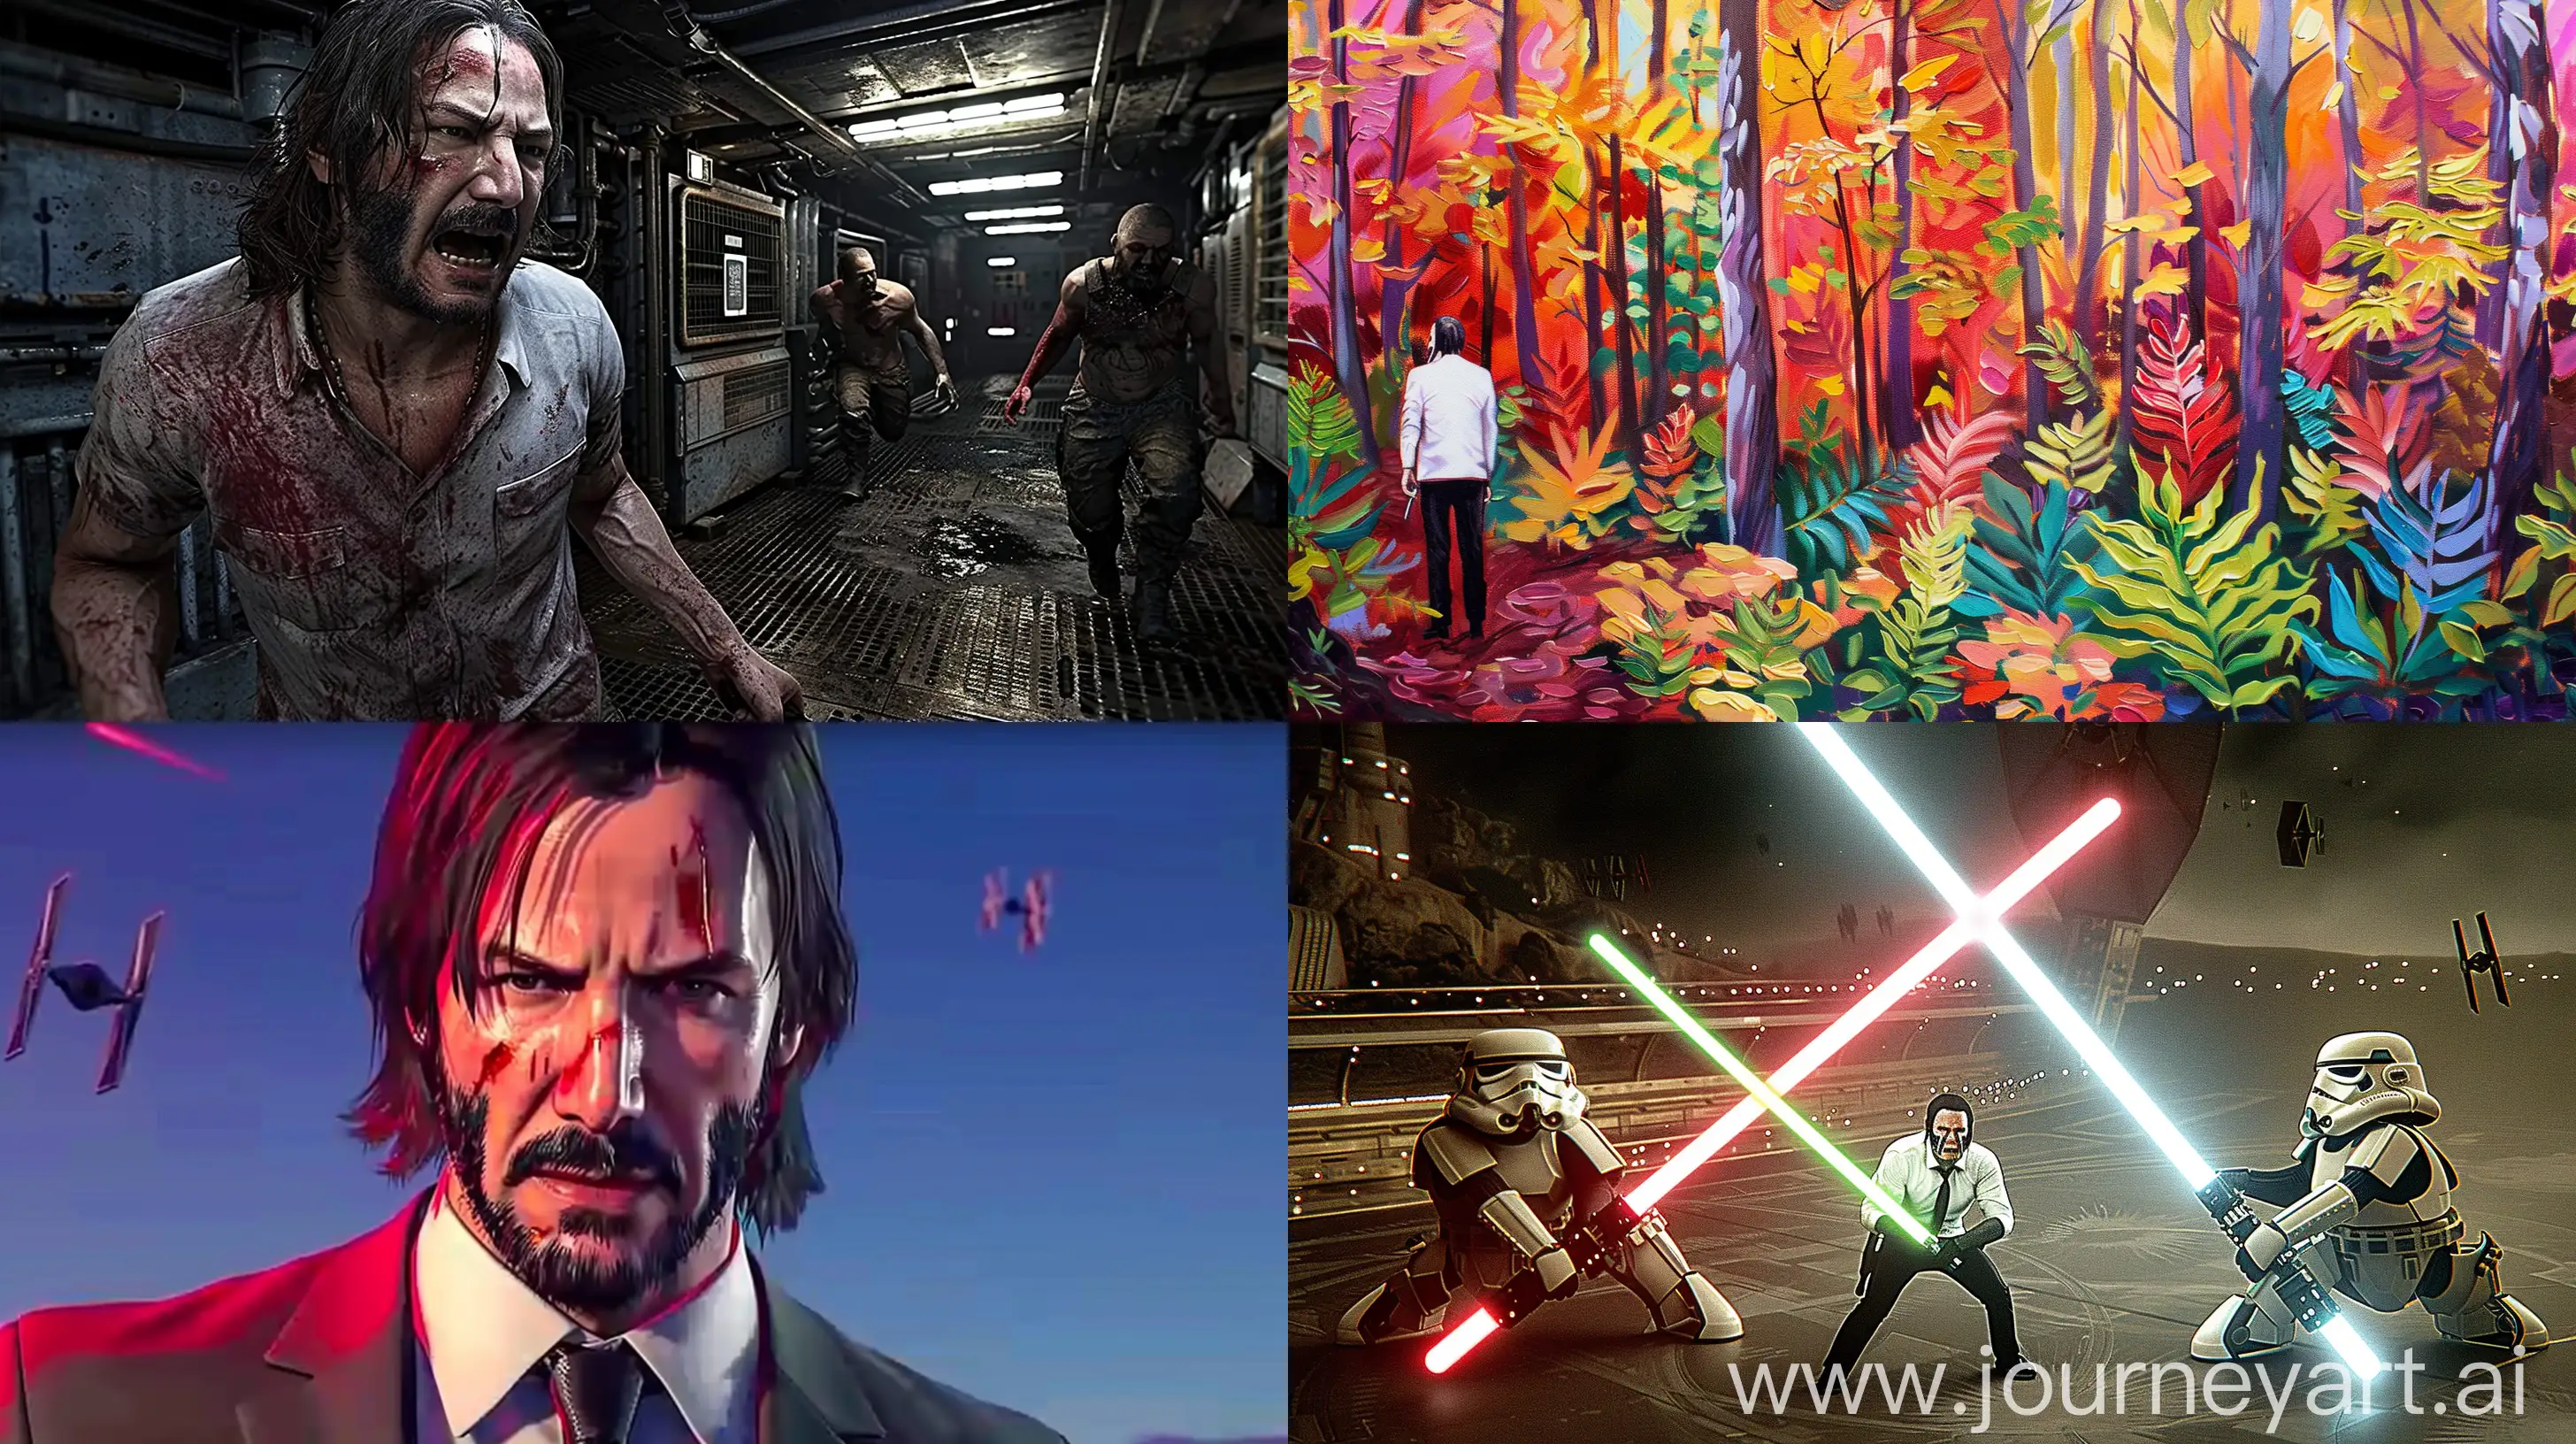 John-Wick-Inspired-Star-Wars-Oil-Painting-in-Bright-Red-Palette